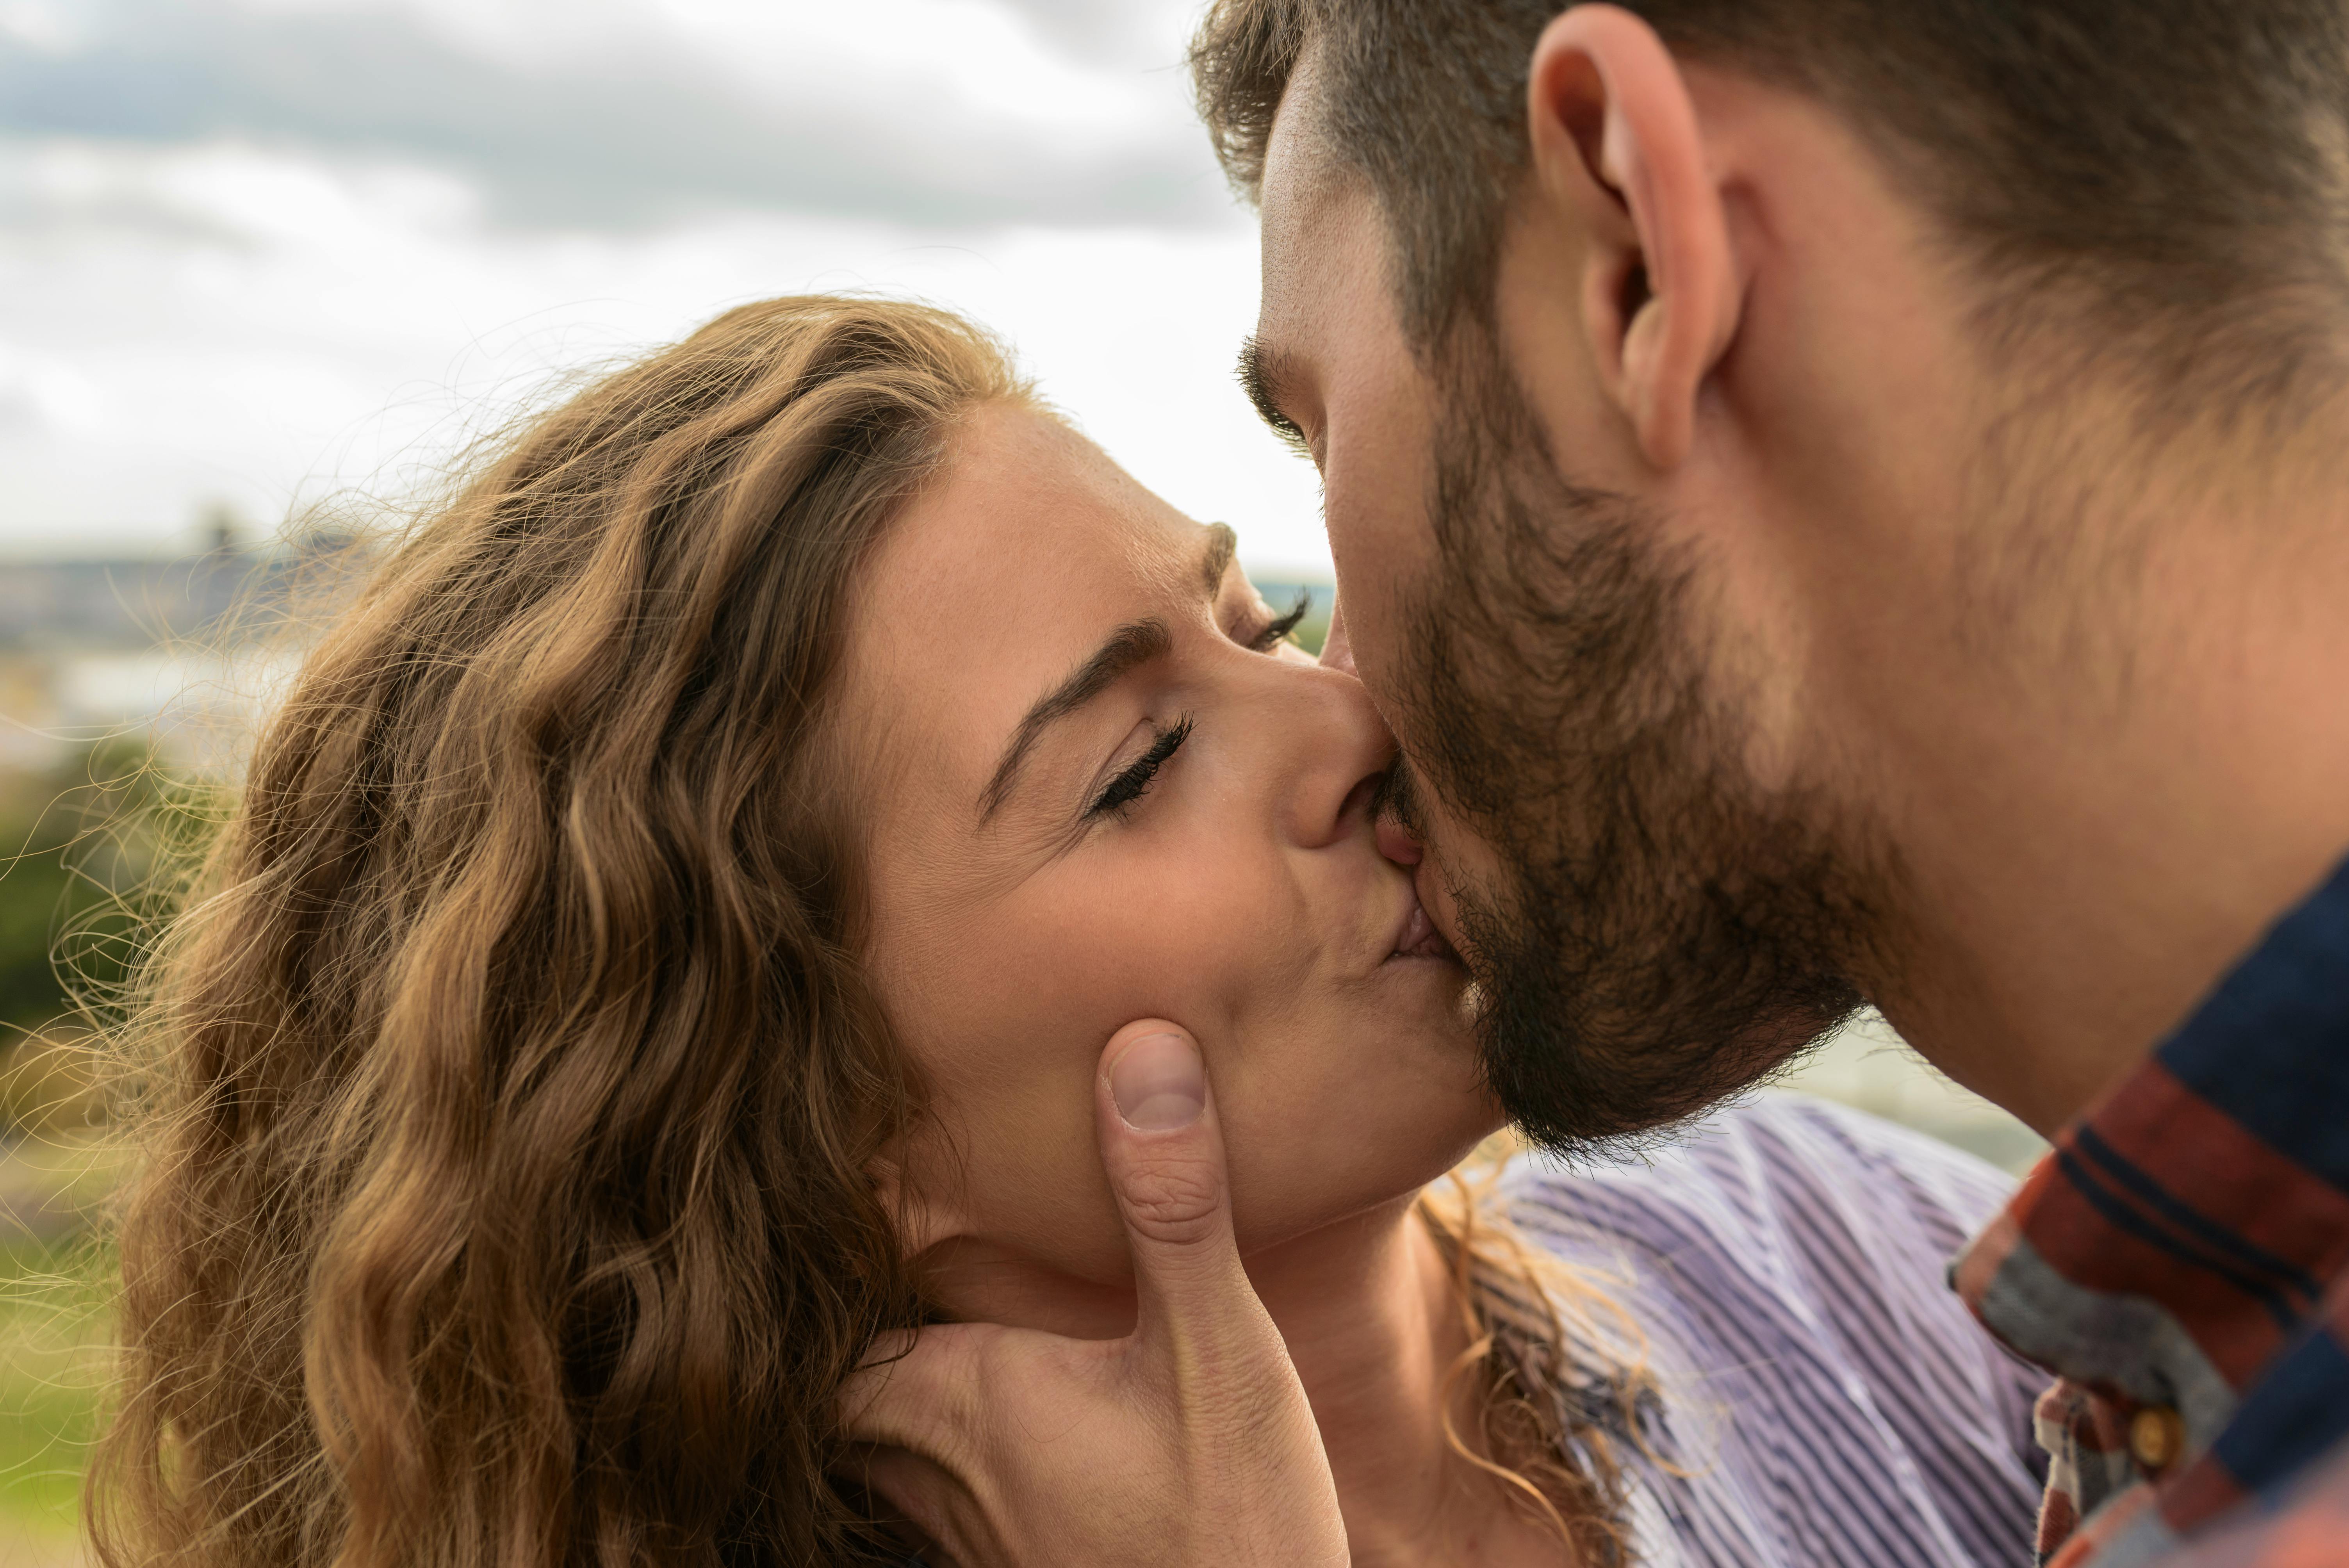 Man And Woman Kiss Each Other Free Stock Photo